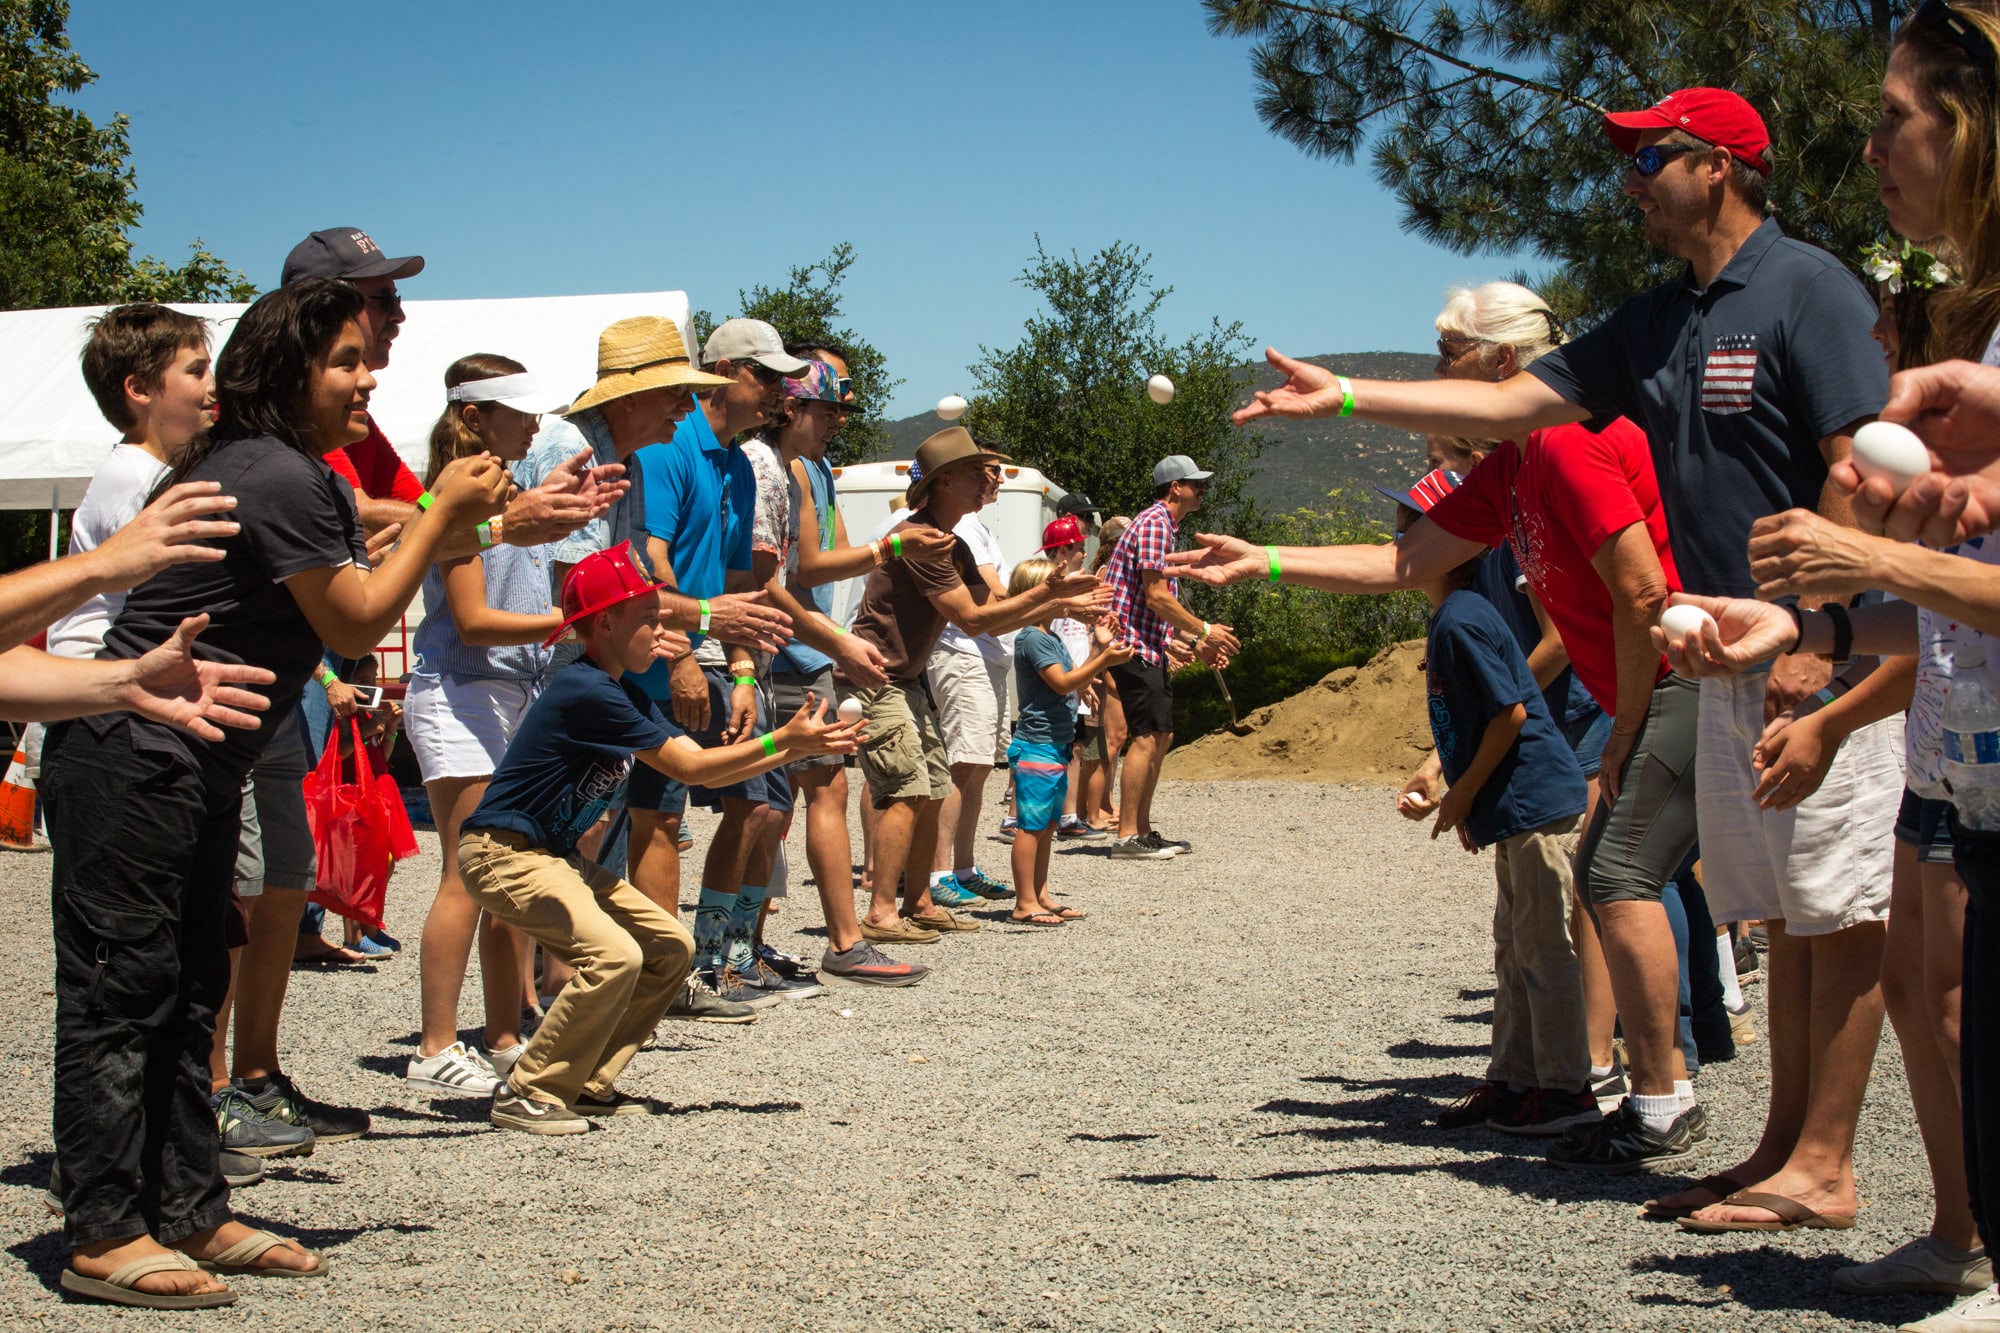 Residents of Elfin Forest and Harmony Grove, California, participate in an egg toss during the towns’ 42nd annual Fourth of July parade and picnic. (Kailey Broussard/News21)